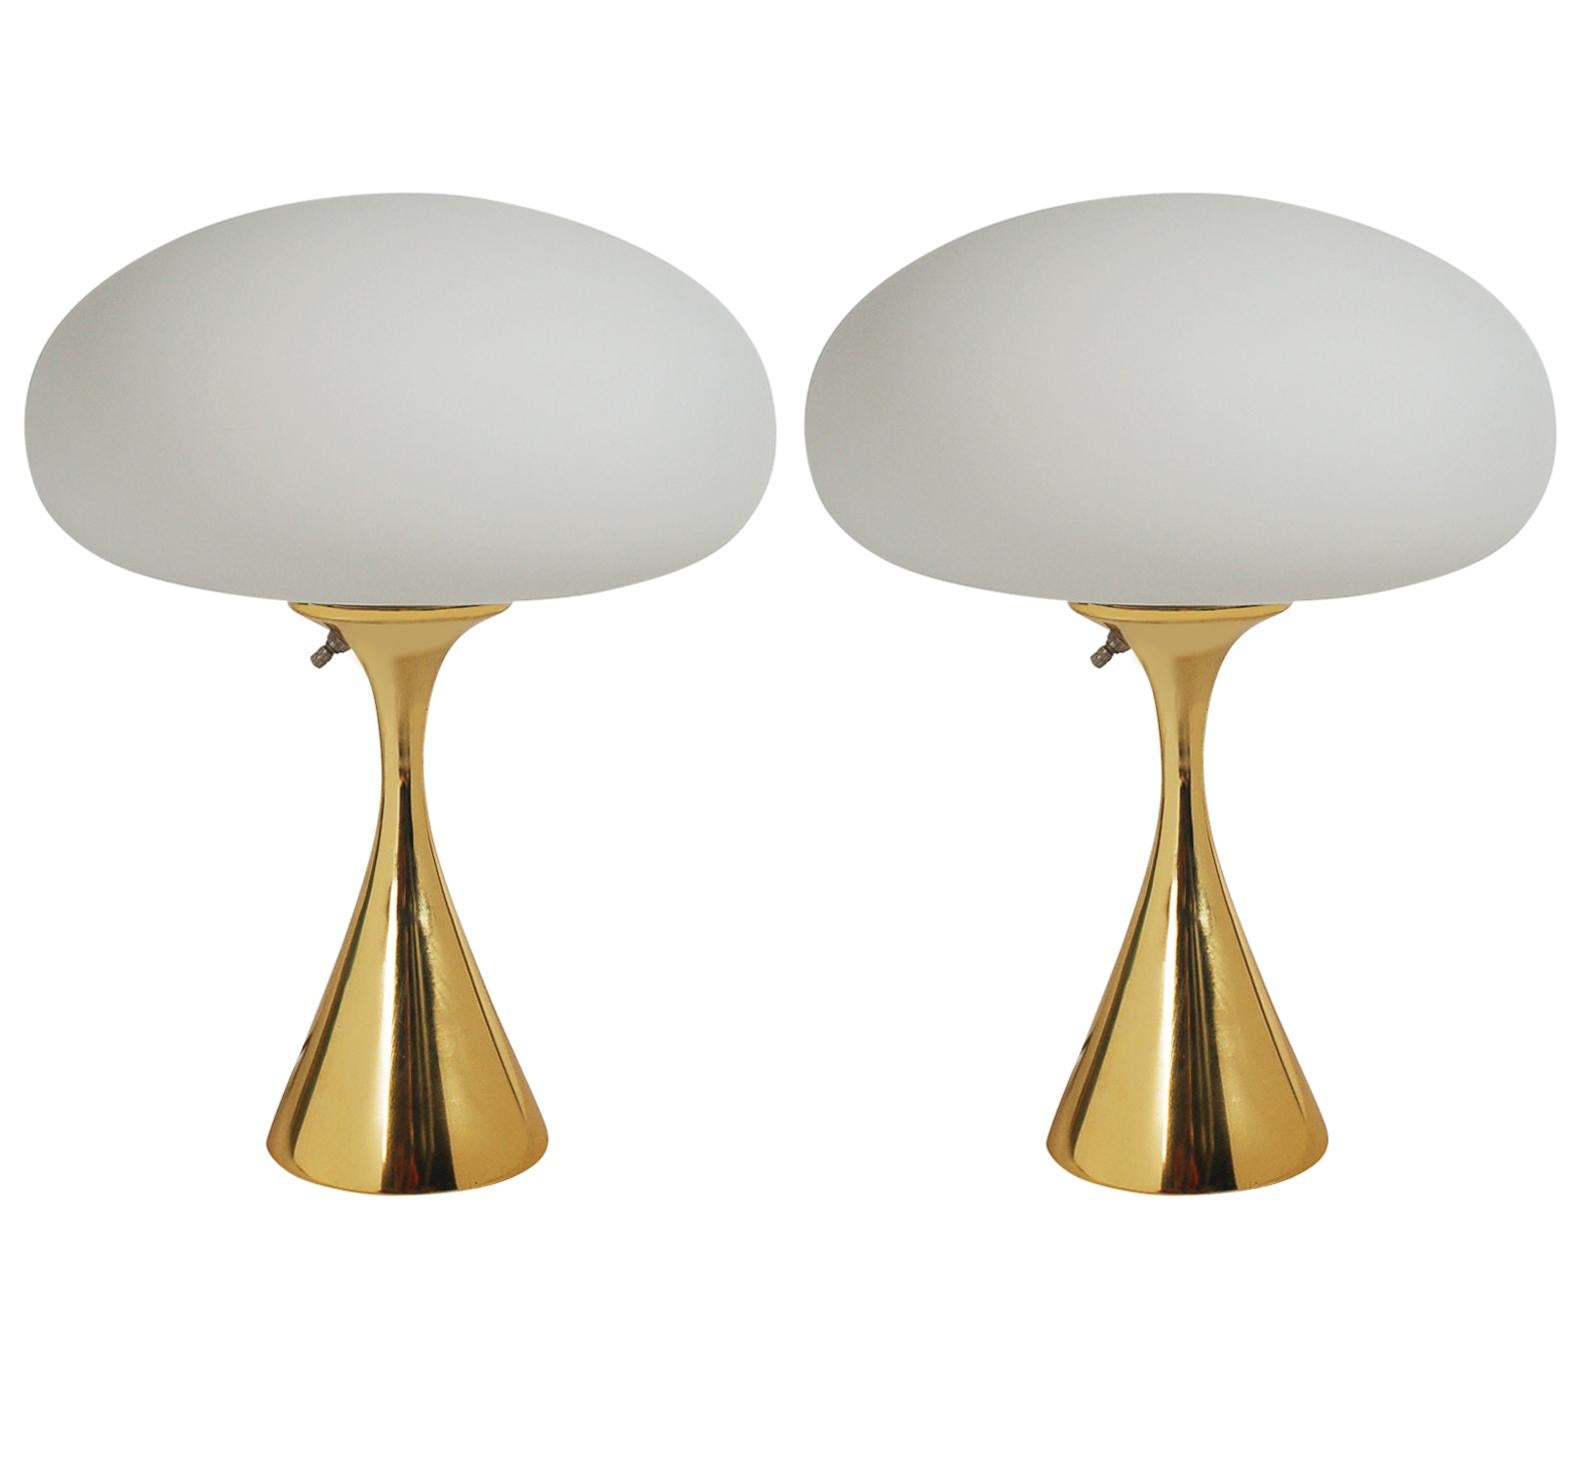 Pair of Mid-Century Modern Laurel Mushroom Table Lamps in Brass by Bill Curry 2